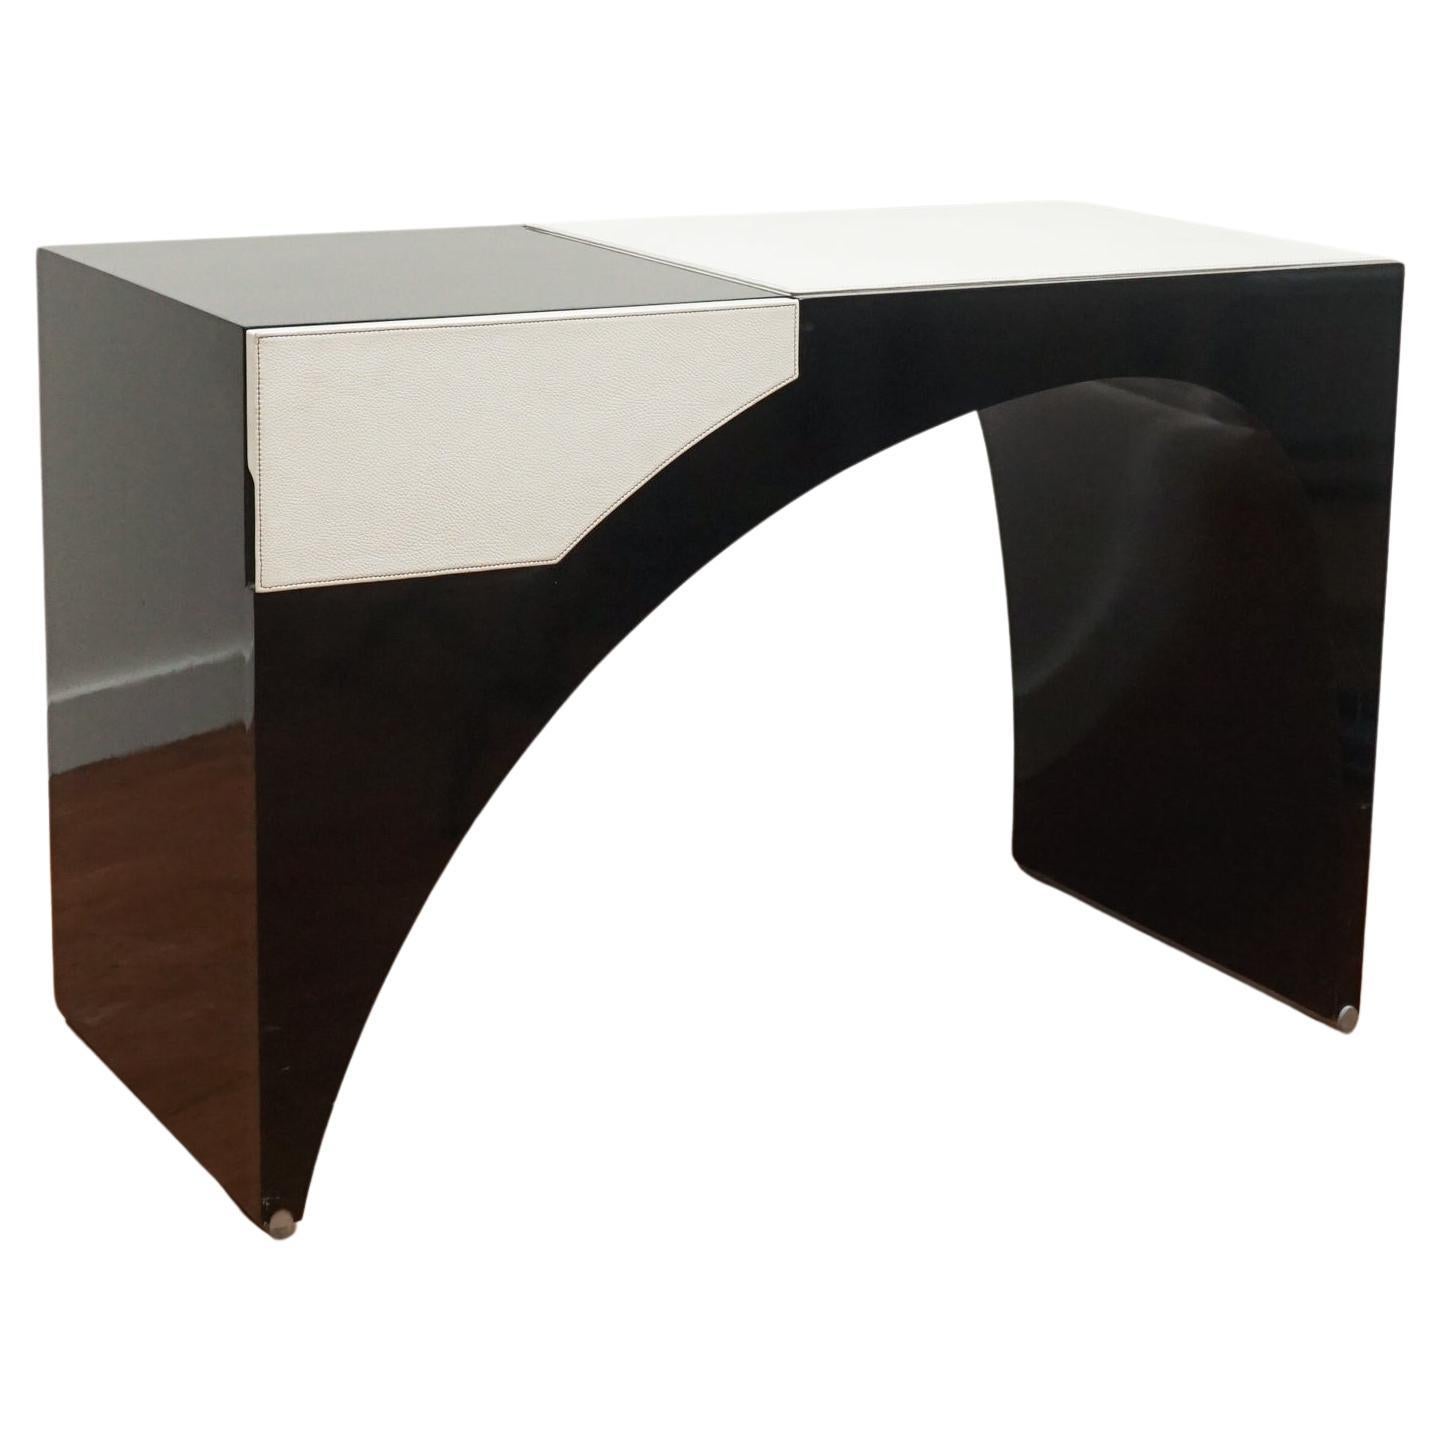 French Art Deco Vanity in Black Lacquer and White Leather For Sale